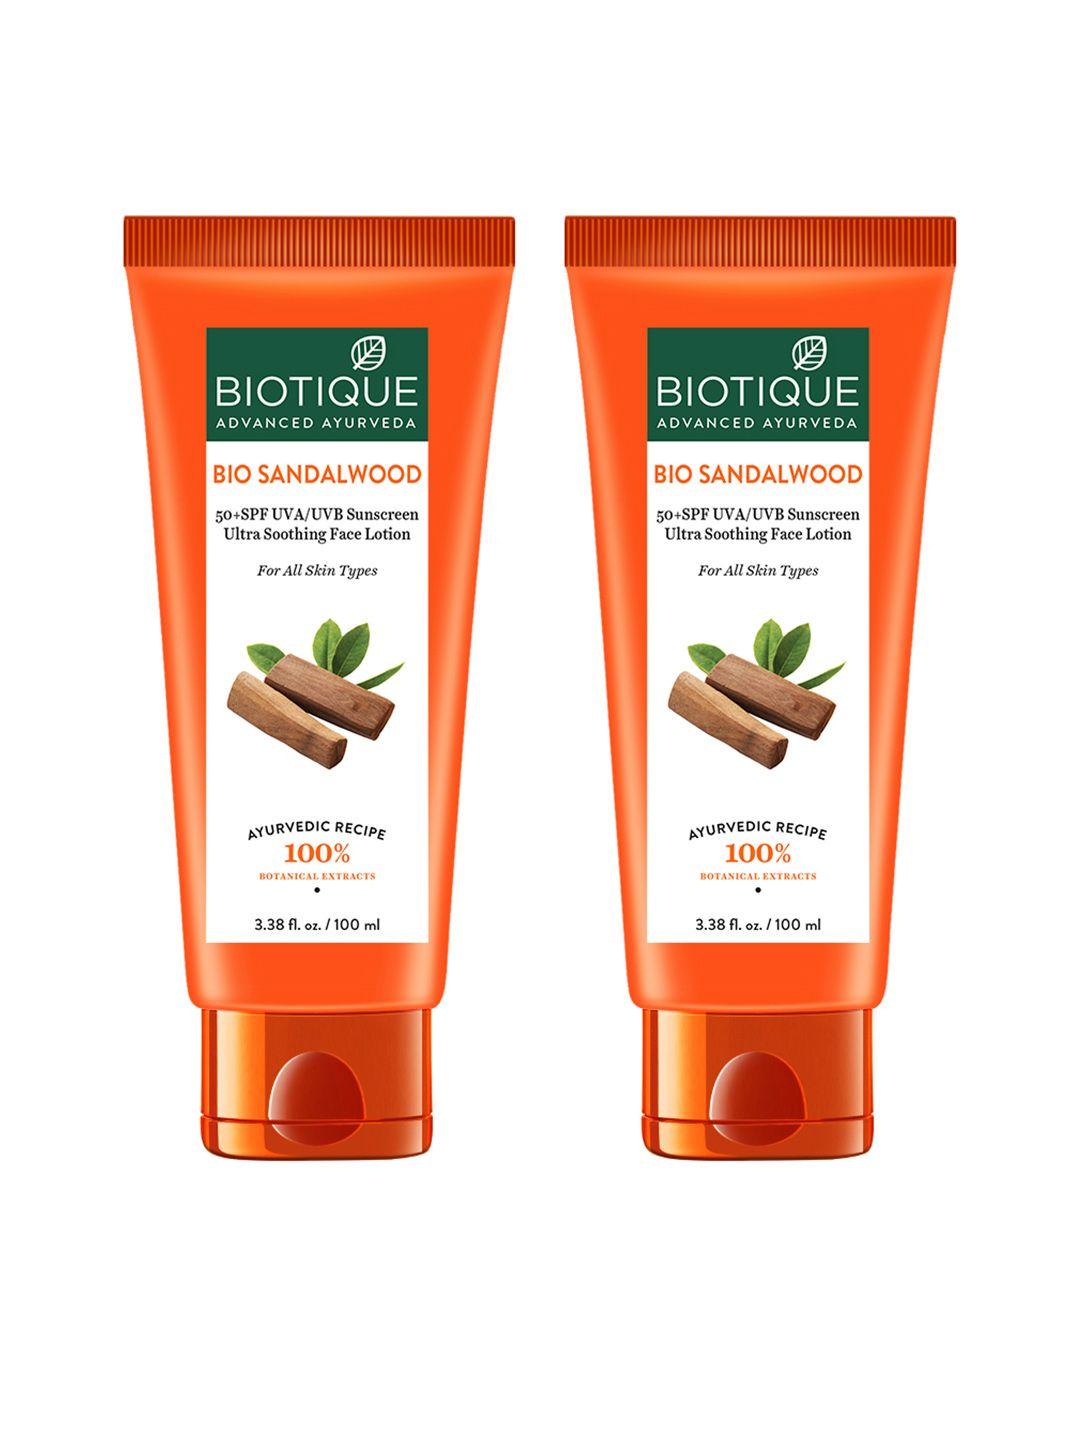 biotique-set-of-2-bio-sandalwood-sunscreen-ultra-soothing-face-lotion-spf-50+---100ml-each